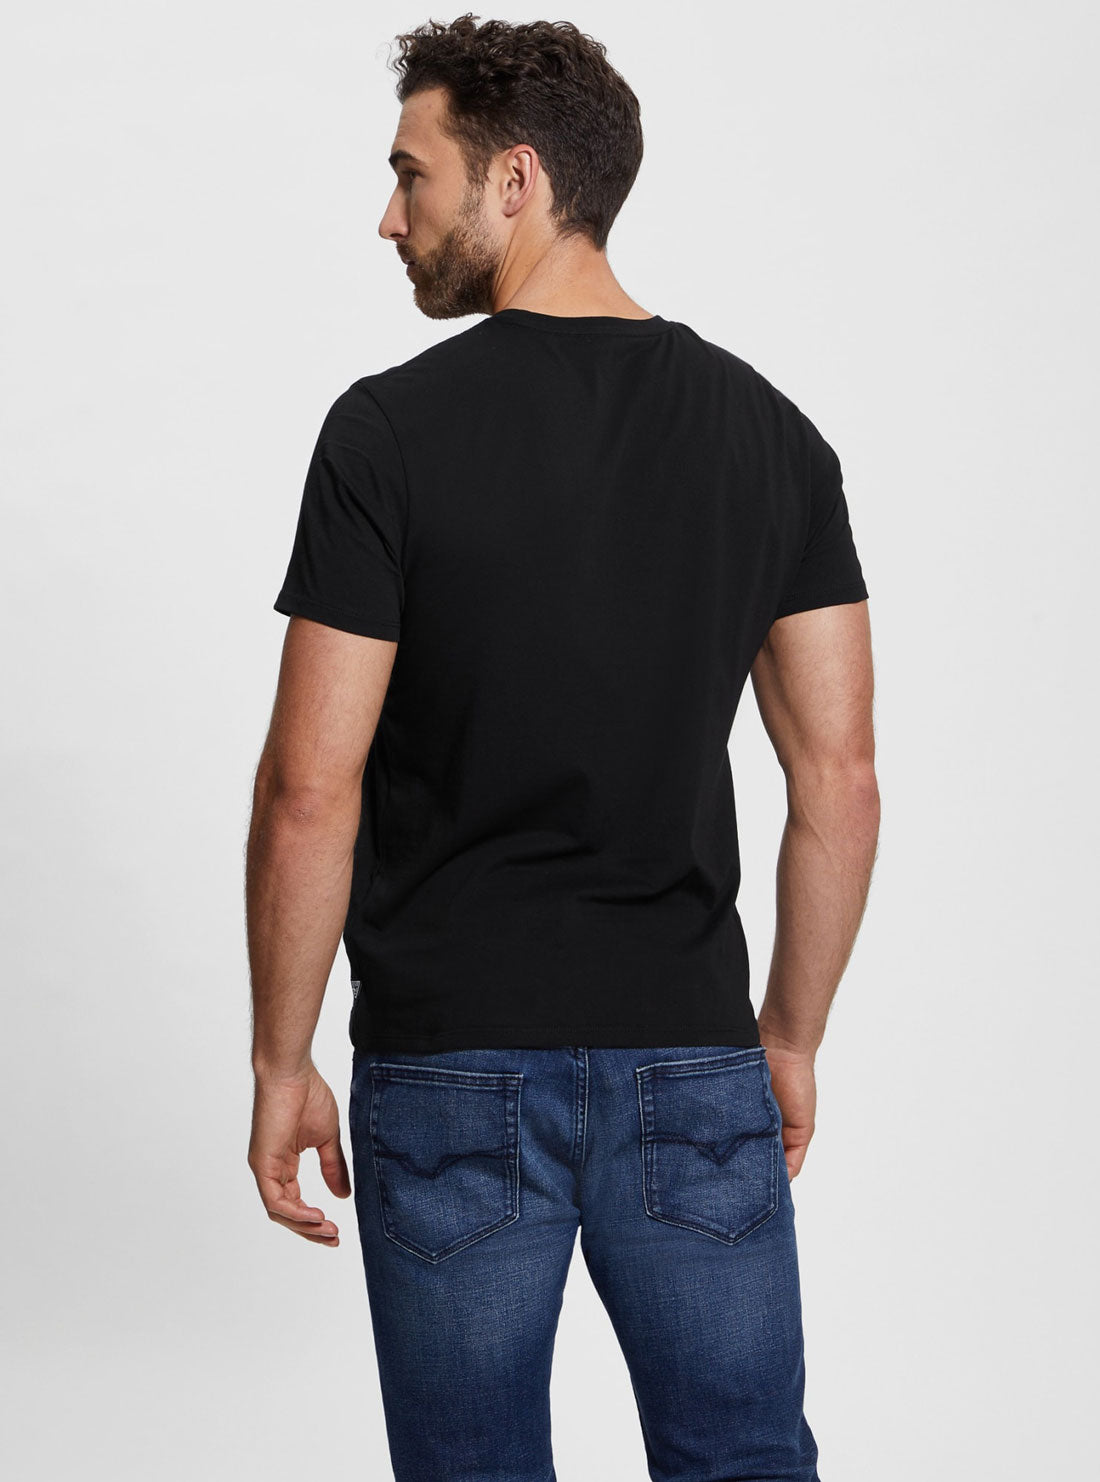 GUESS Black Gold Barque T-Shirt back view